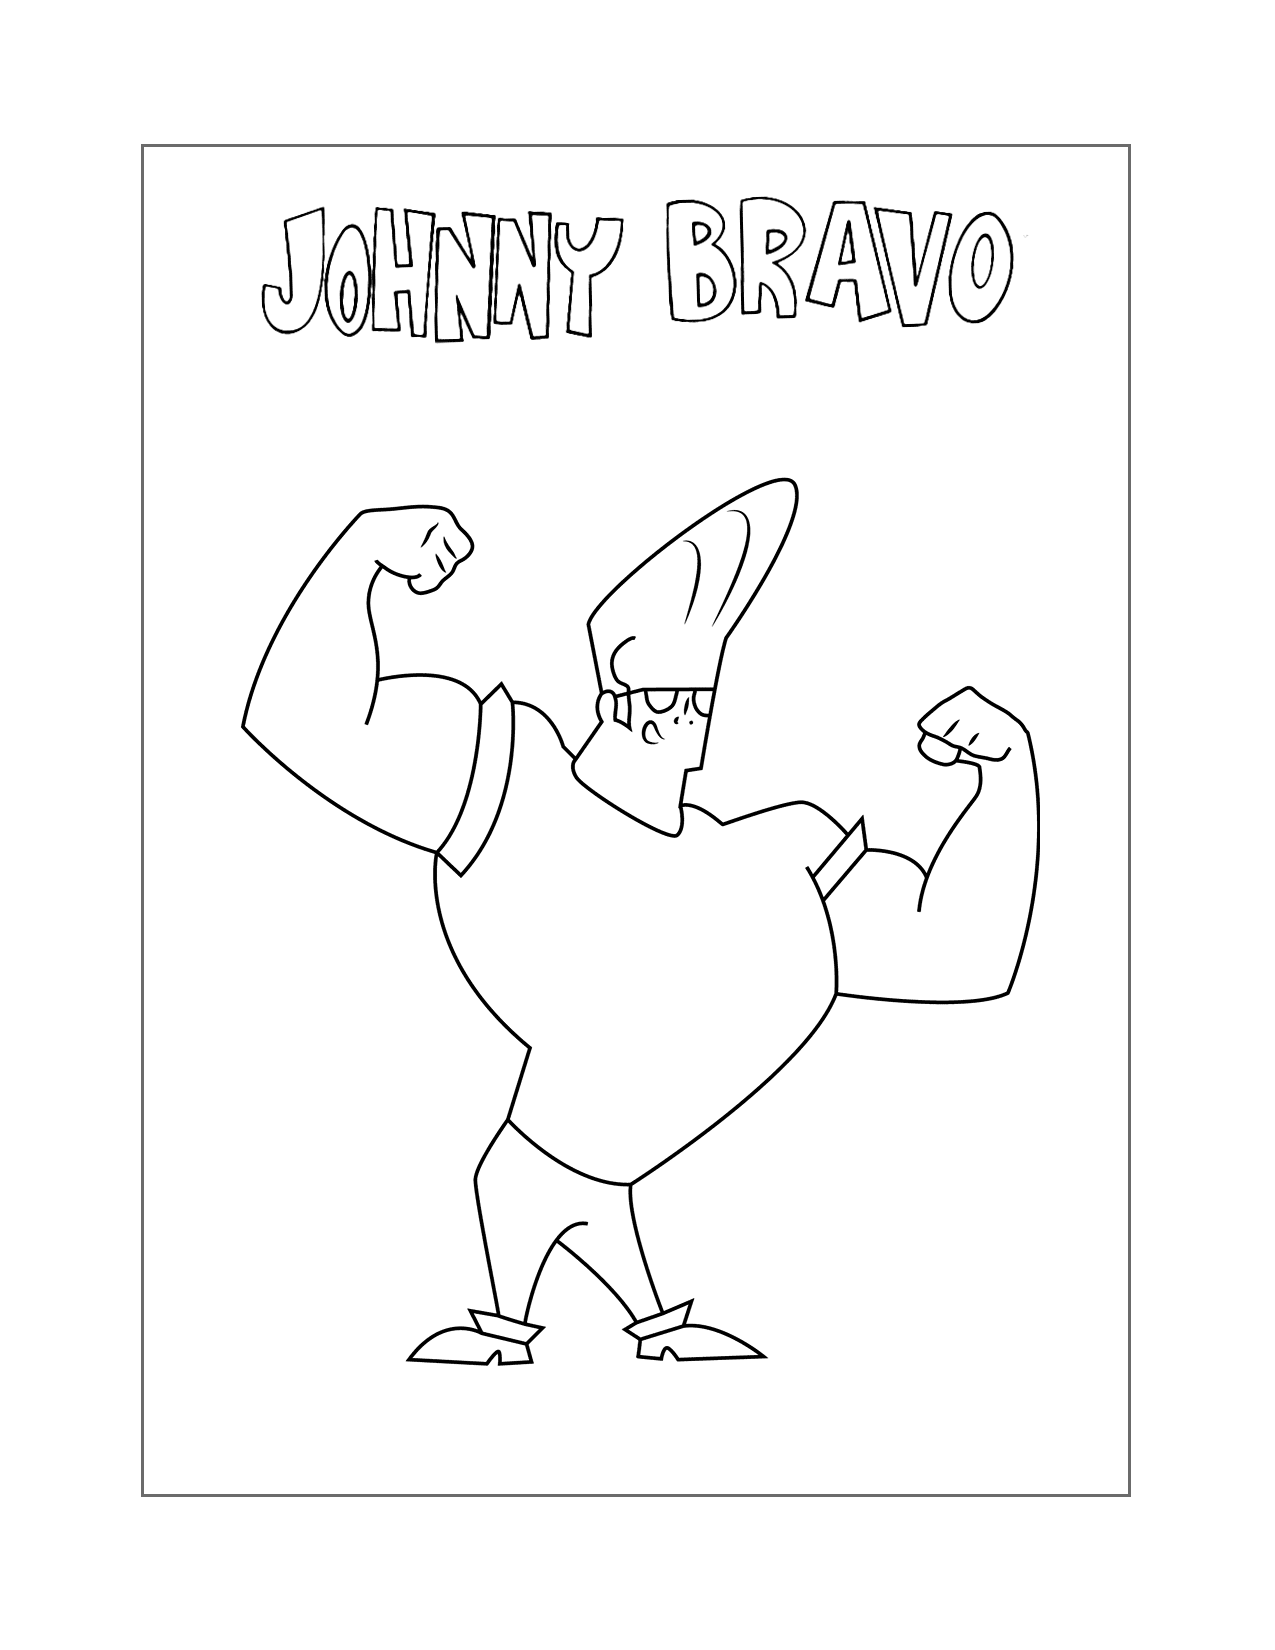 Johnny Bravo Flexing Muscles Coloring Page